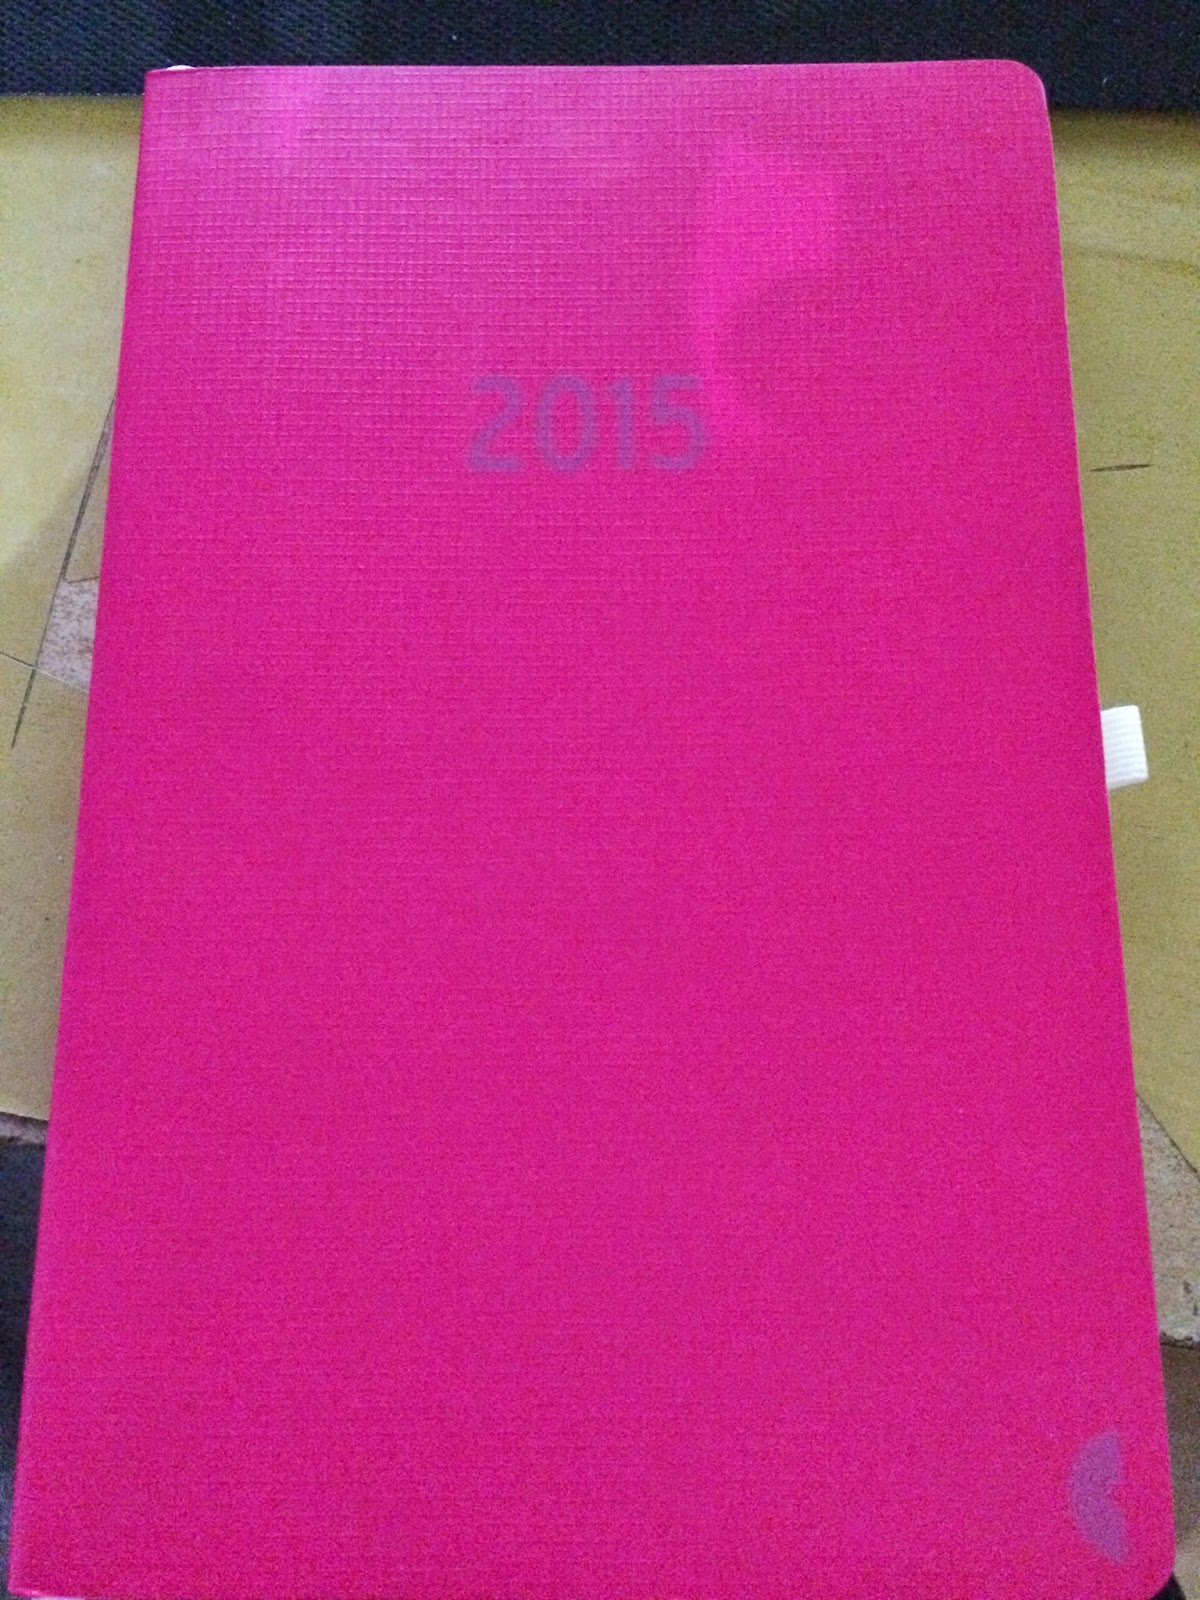 *Werbung* Produkttest Chronobook Colour Edition in Pink by Avery Zweckform 1